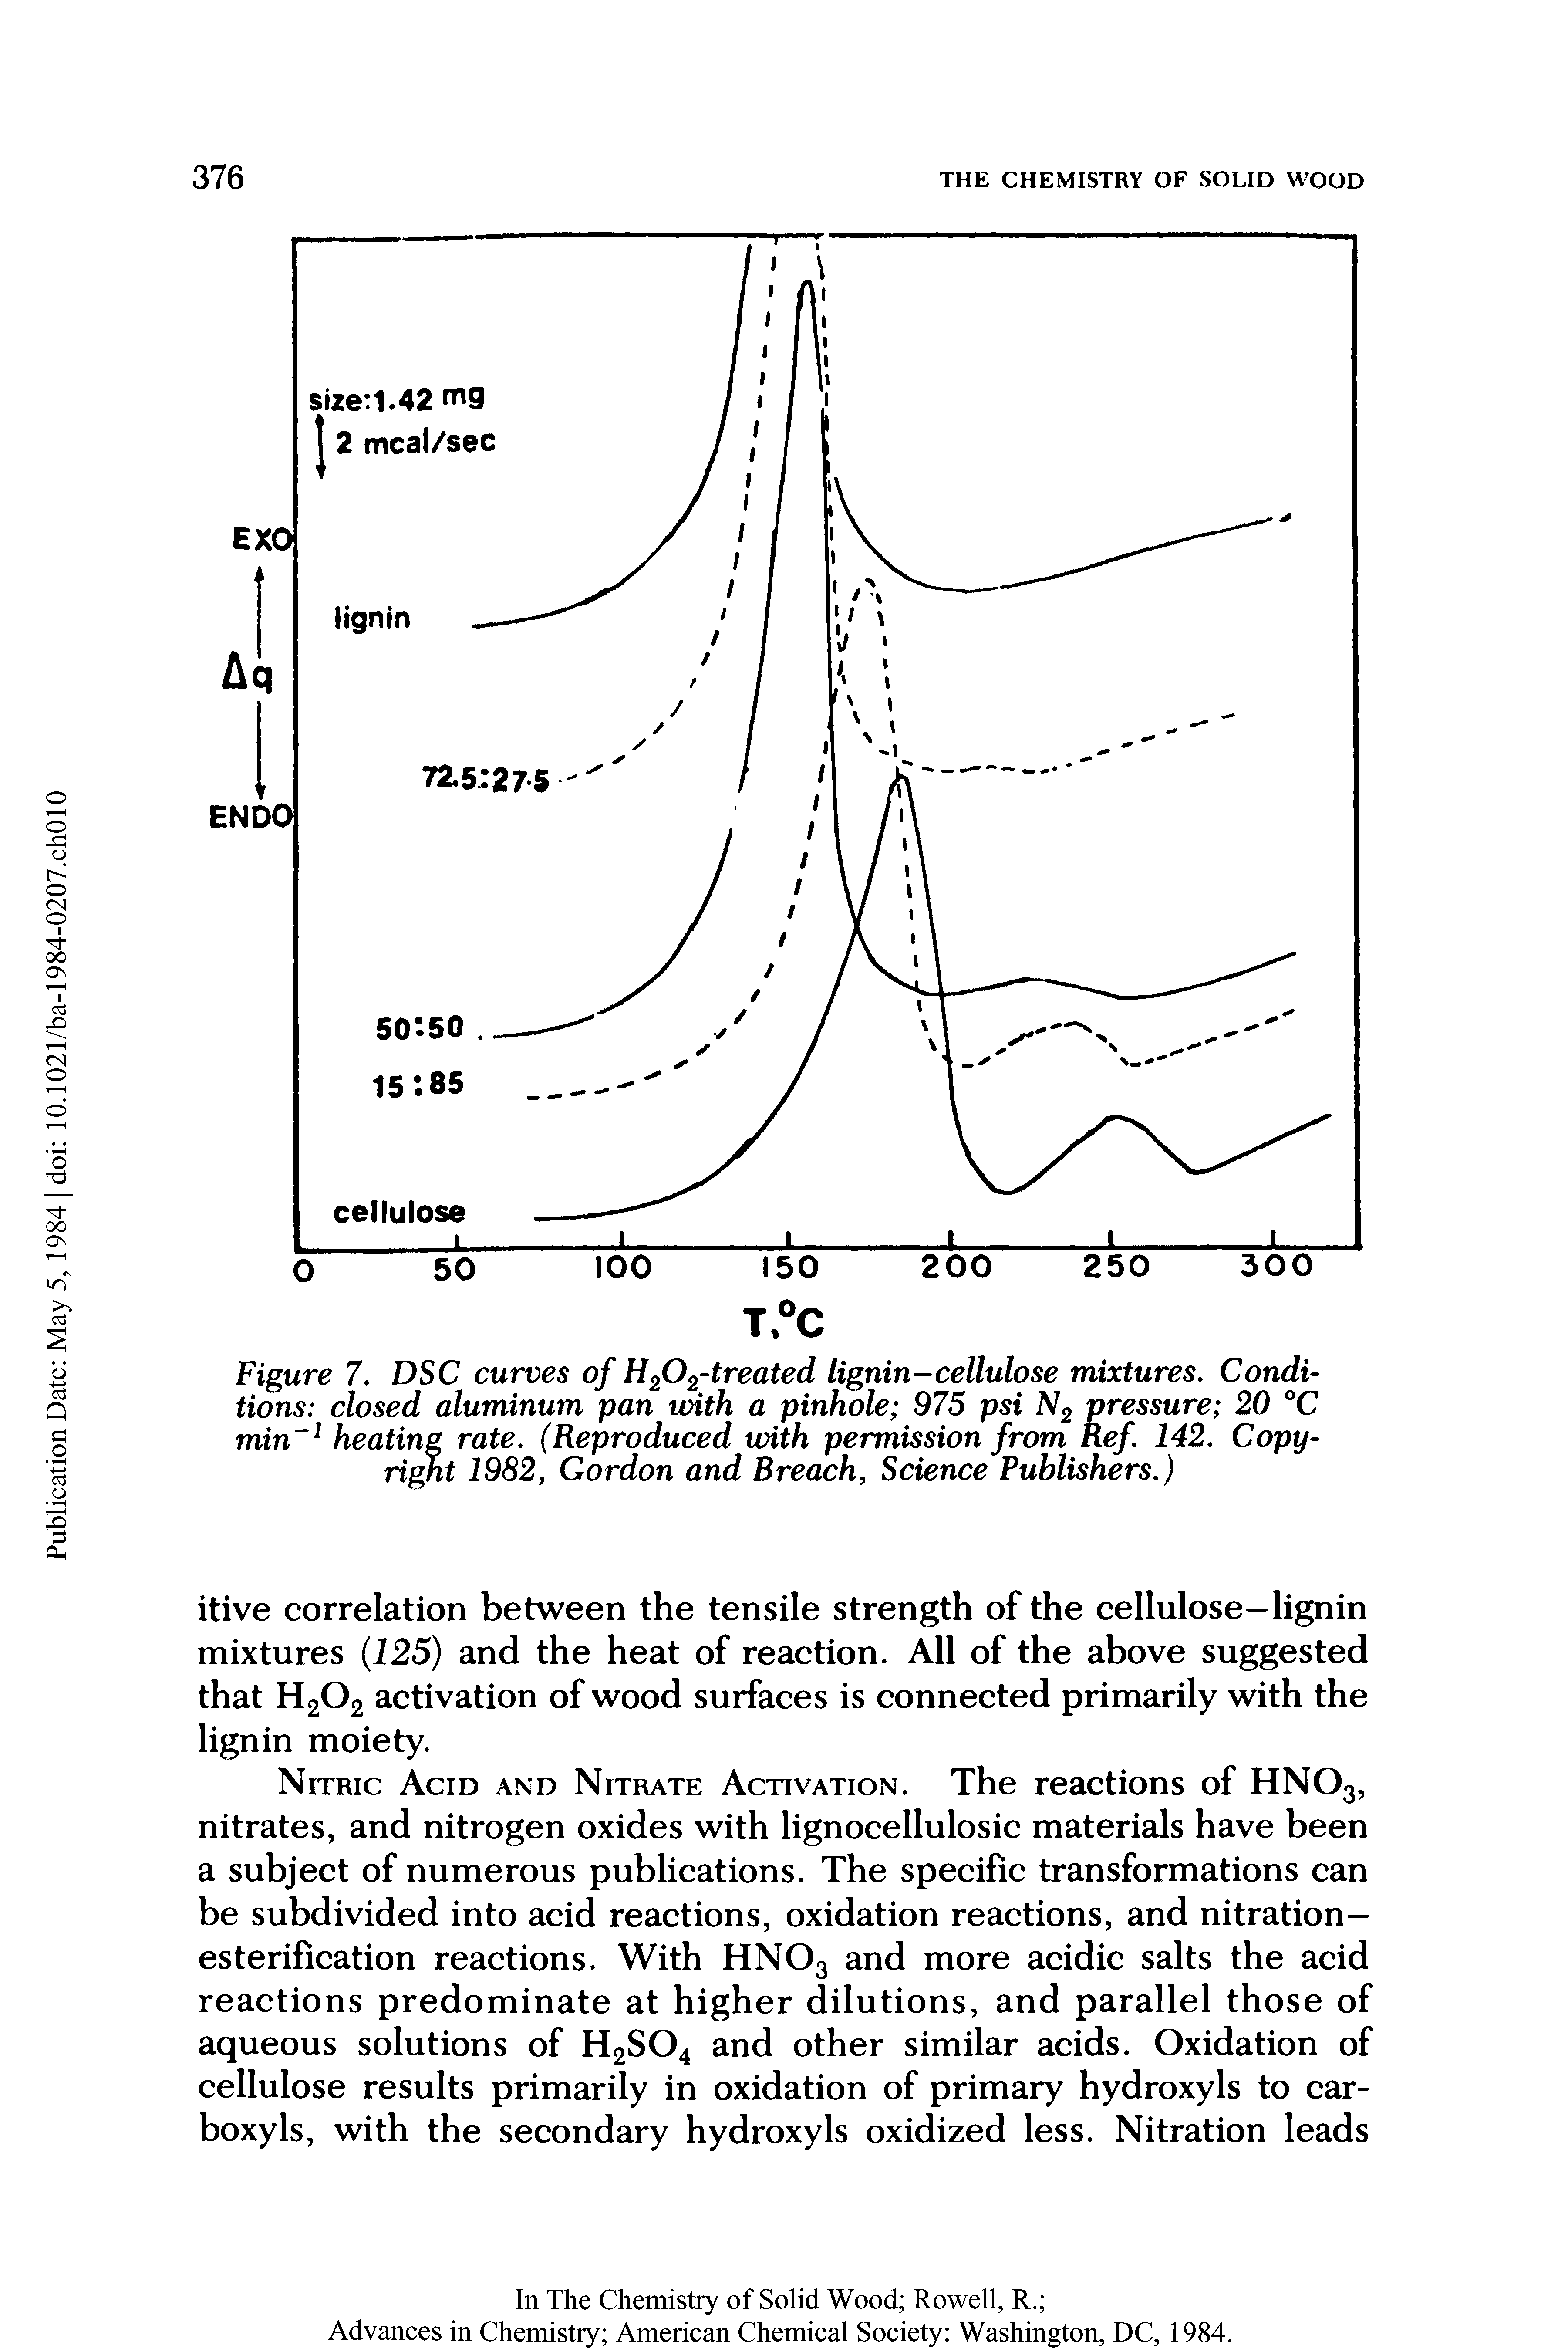 Figure 7. DSC curves of H202 treated lignin-cellulose mixtures. Conditions closed aluminum pan with a pinhole 975 psi N2 pressure 20 °C min heating rate. (Reproduced with permission from Ref 142. Copy-right 1982y Gordon and Breach Science Publishers.)...